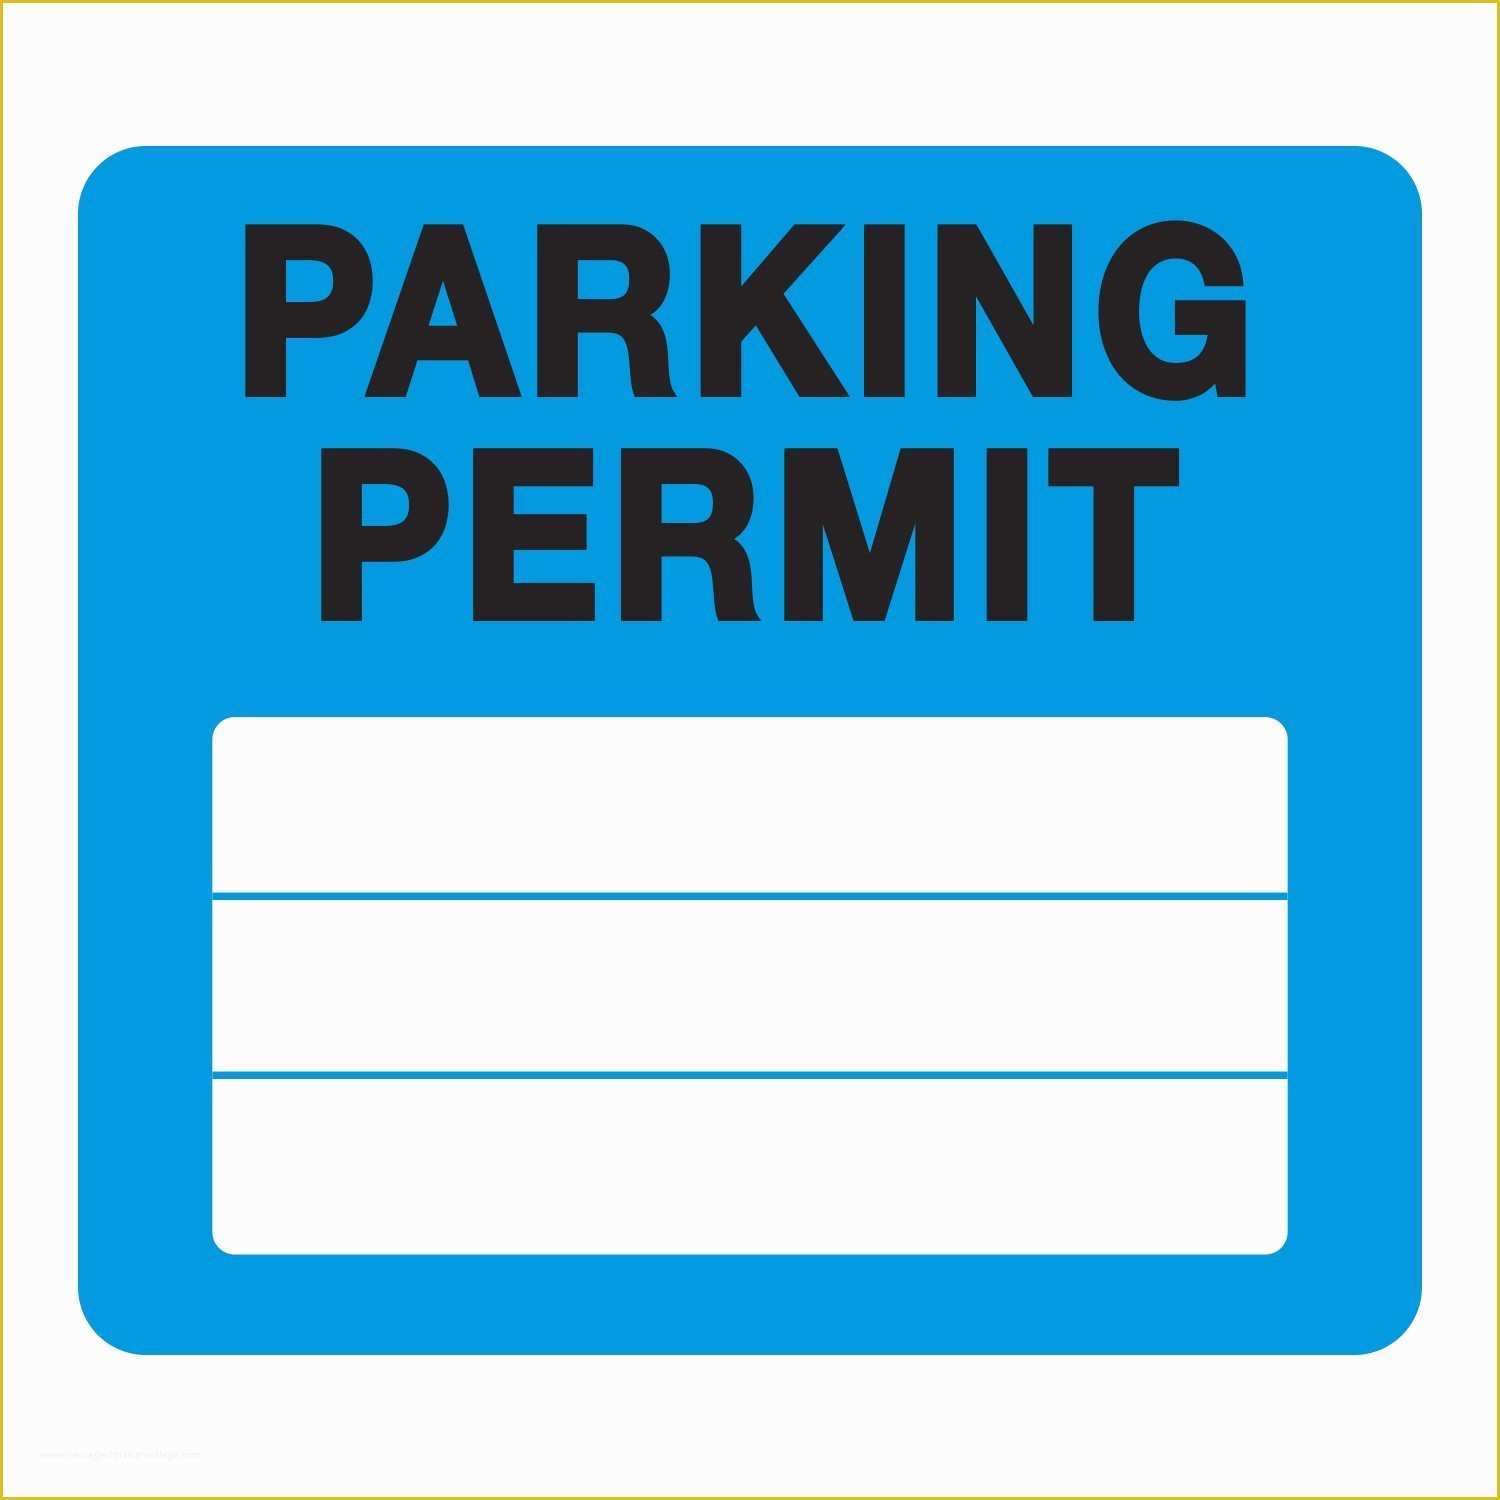 Free Parking Permit Template Download Of Milcoast Parking Permit Pass Stock Static Cling Non